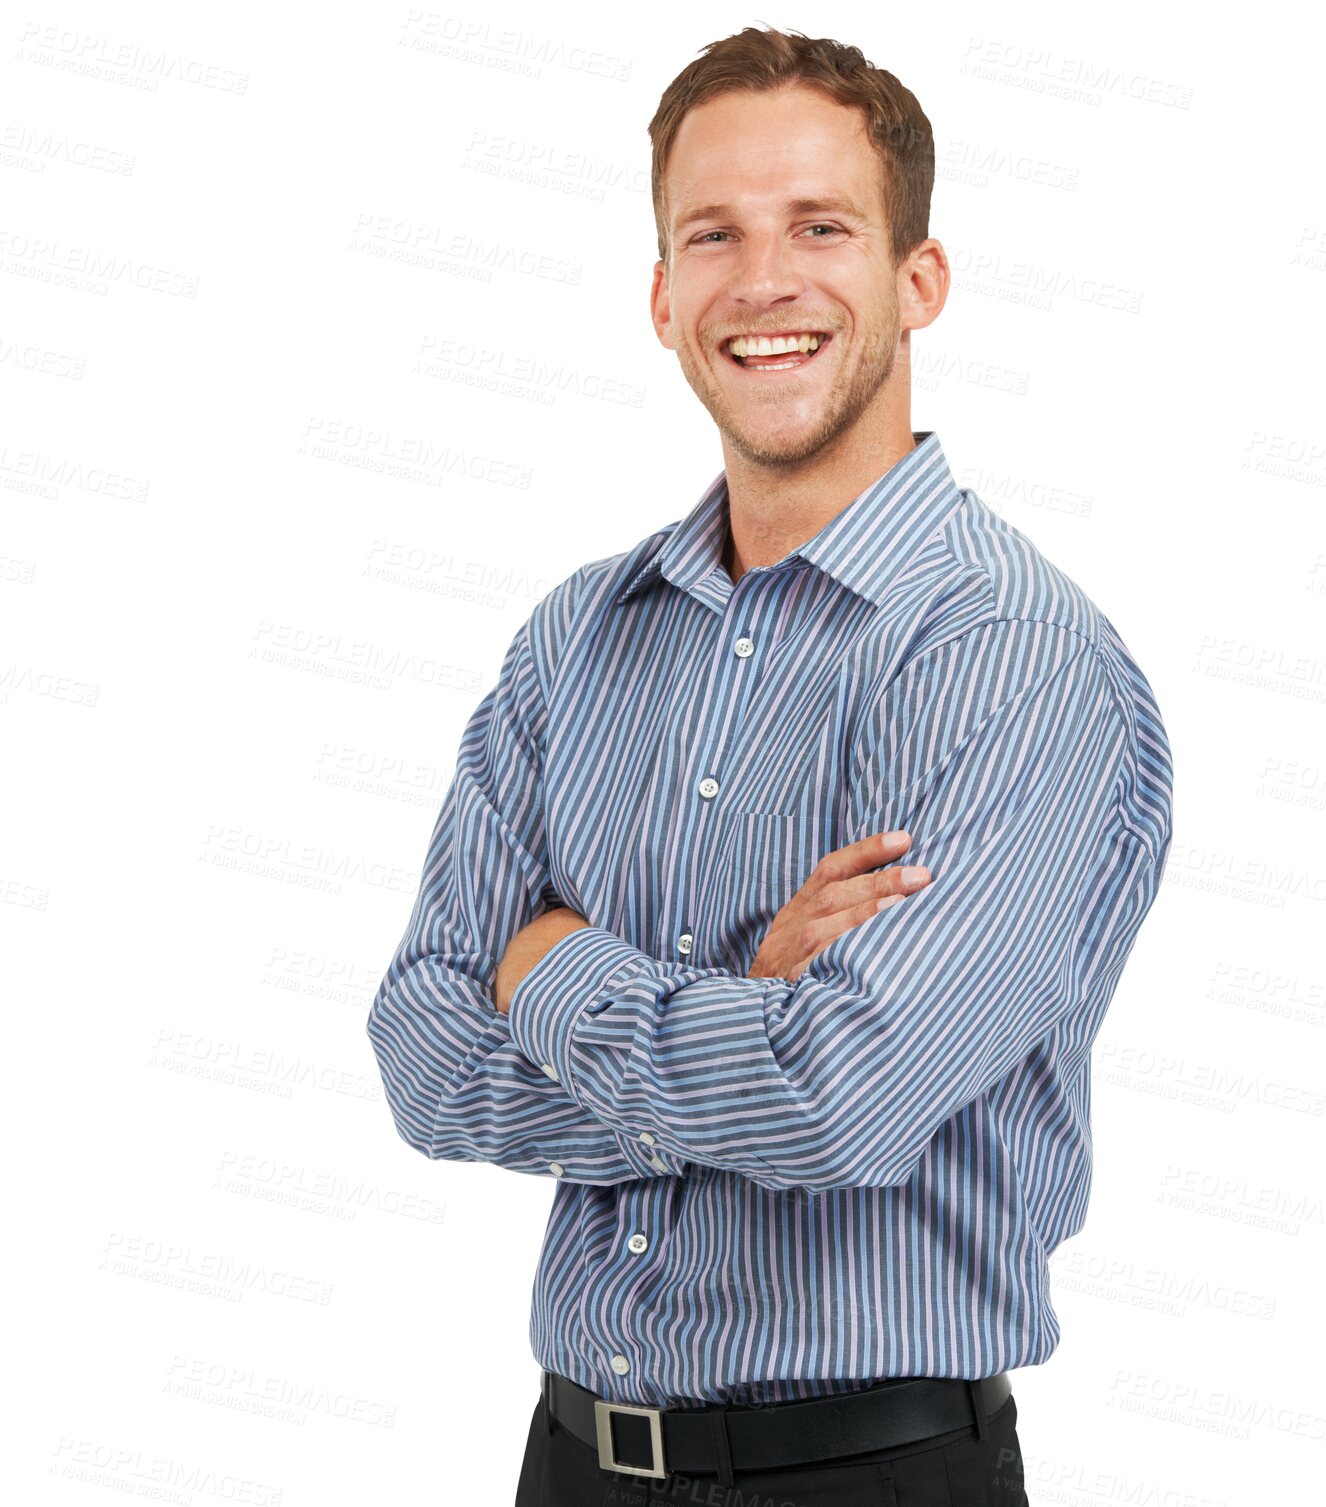 Buy stock photo Portrait, smile and arms crossed with a business man isolated on transparent background for executive style. Smile, happy and corporate with a handsome young male employee in clothes for work on PNG